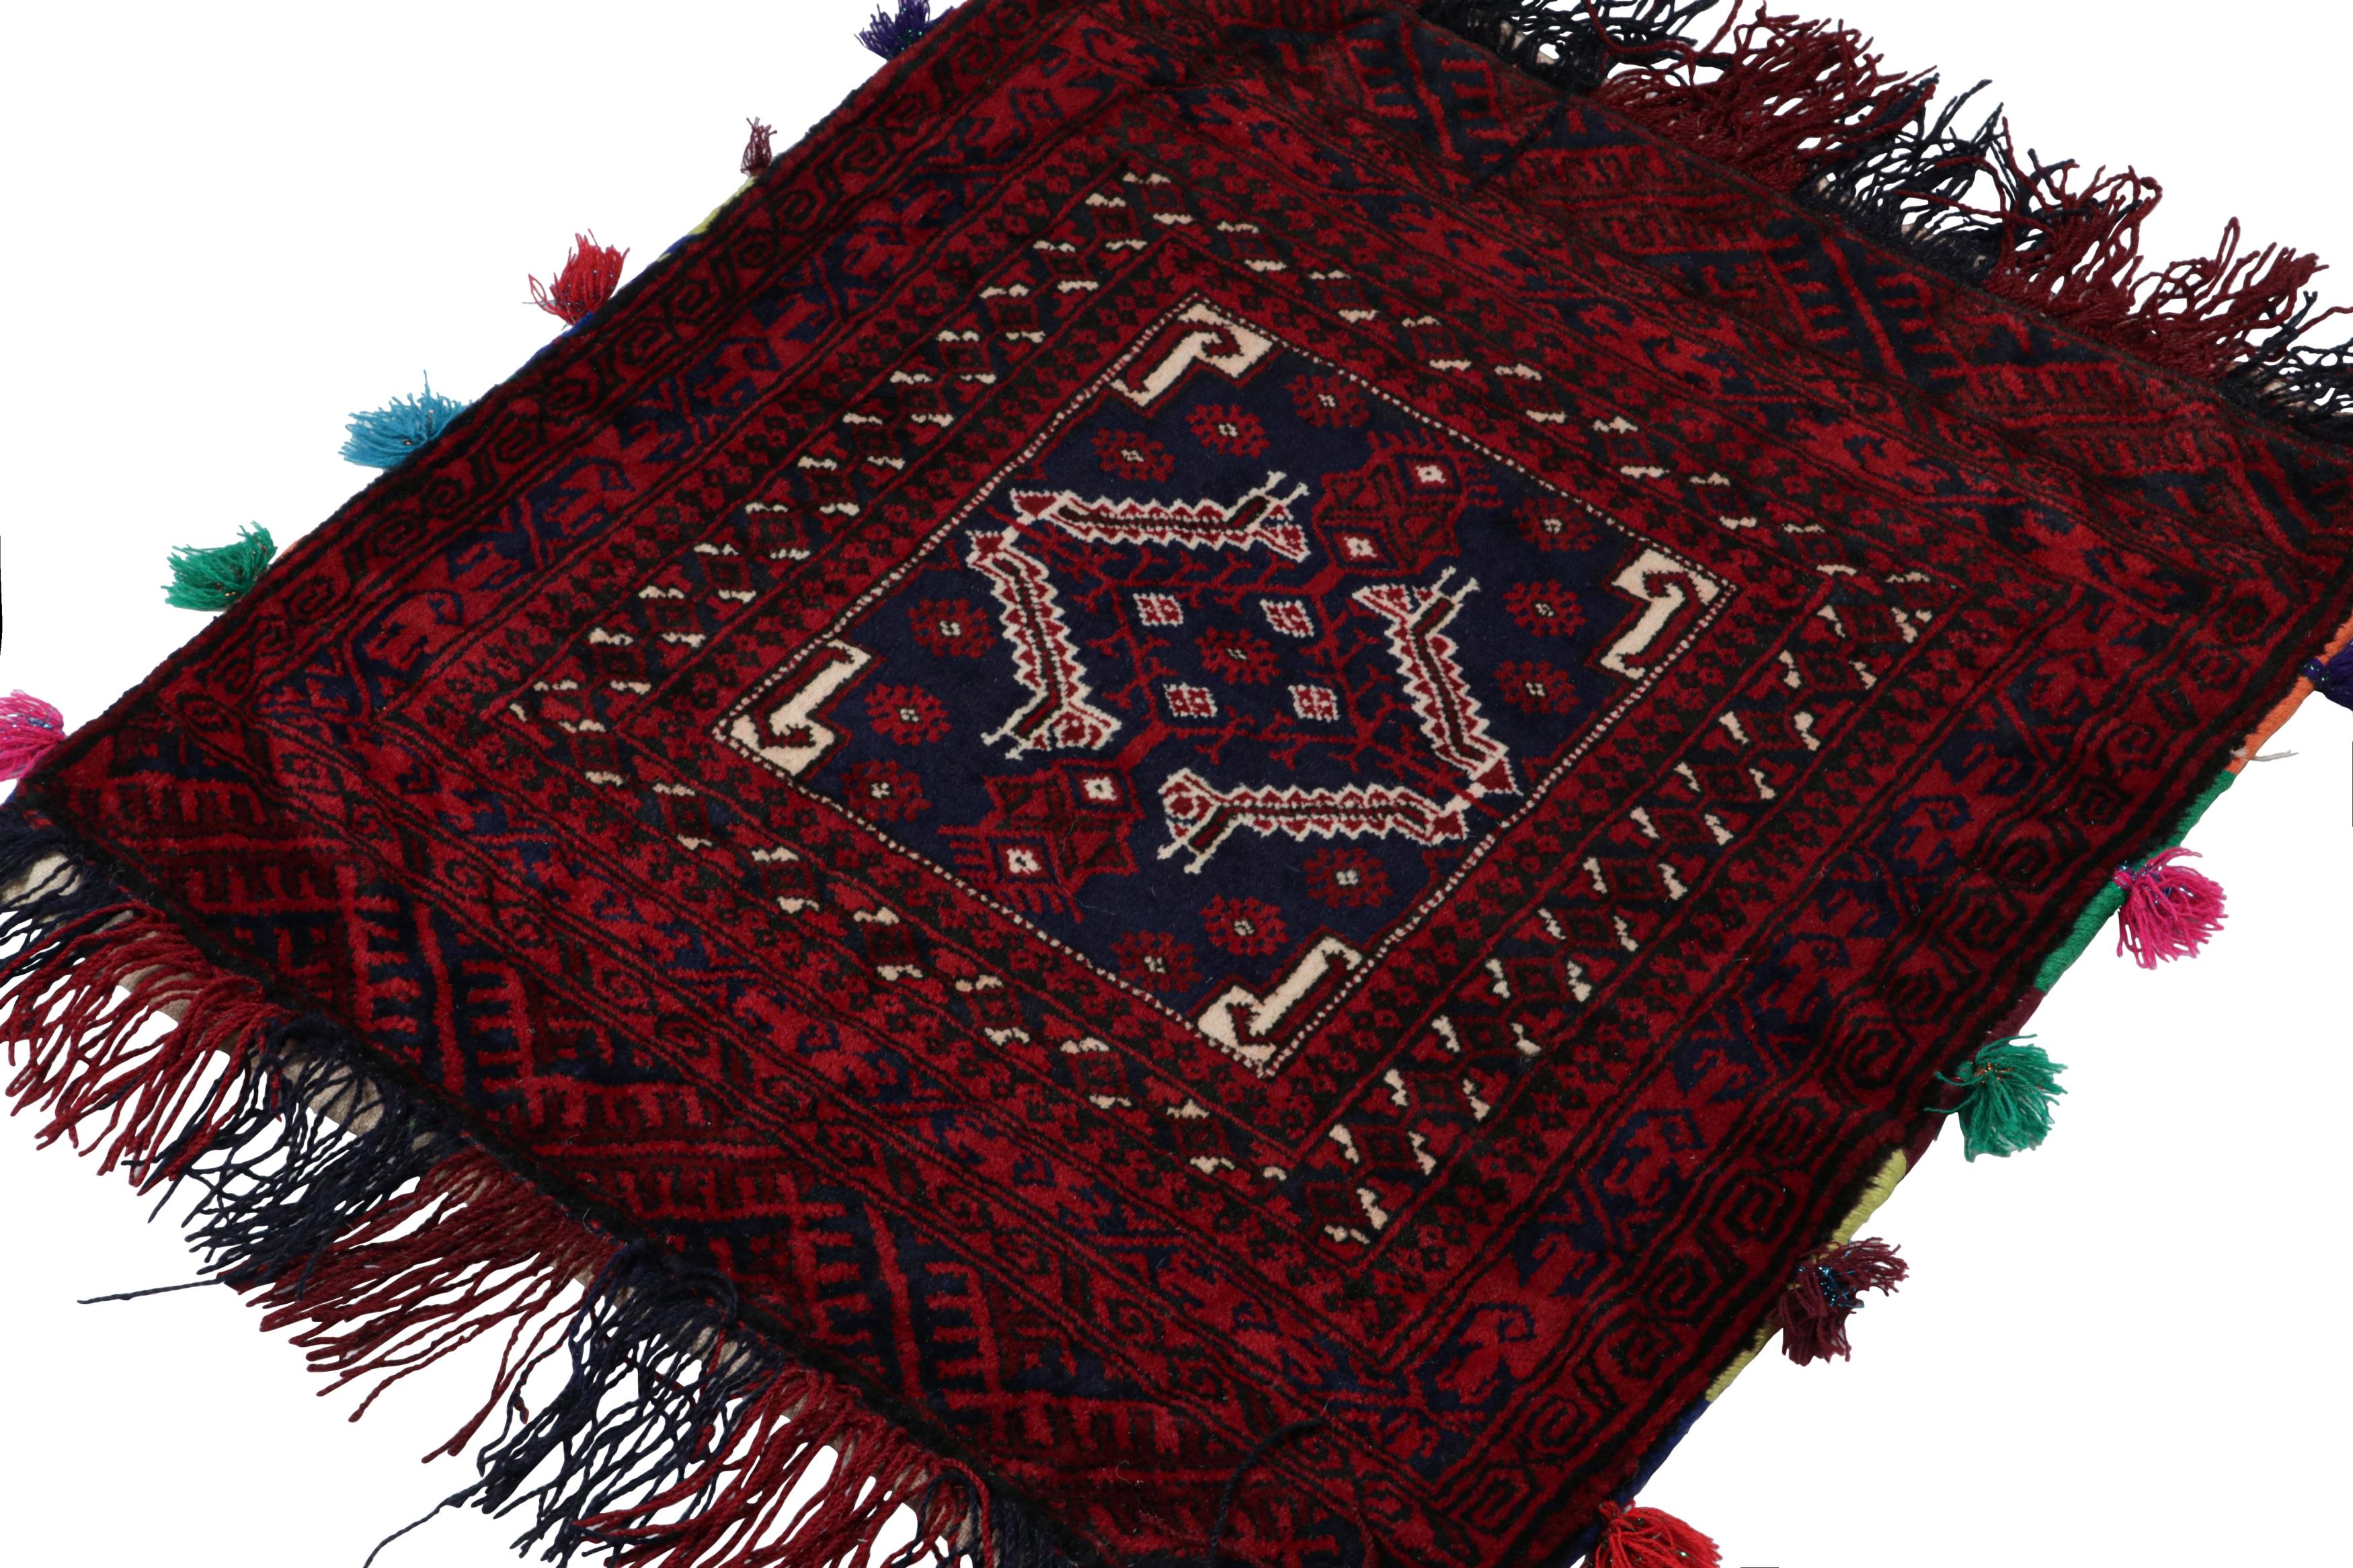 Hand-knotted in wool, this 2x2 Baluch Persian rug of the 1950s is the latest to enter Rug & Kilim’s Antique & Vintage collection.

On the Design:

The vintage Baluch rug carries a striking medallion with tribal patterns in rich tones of red, blue &